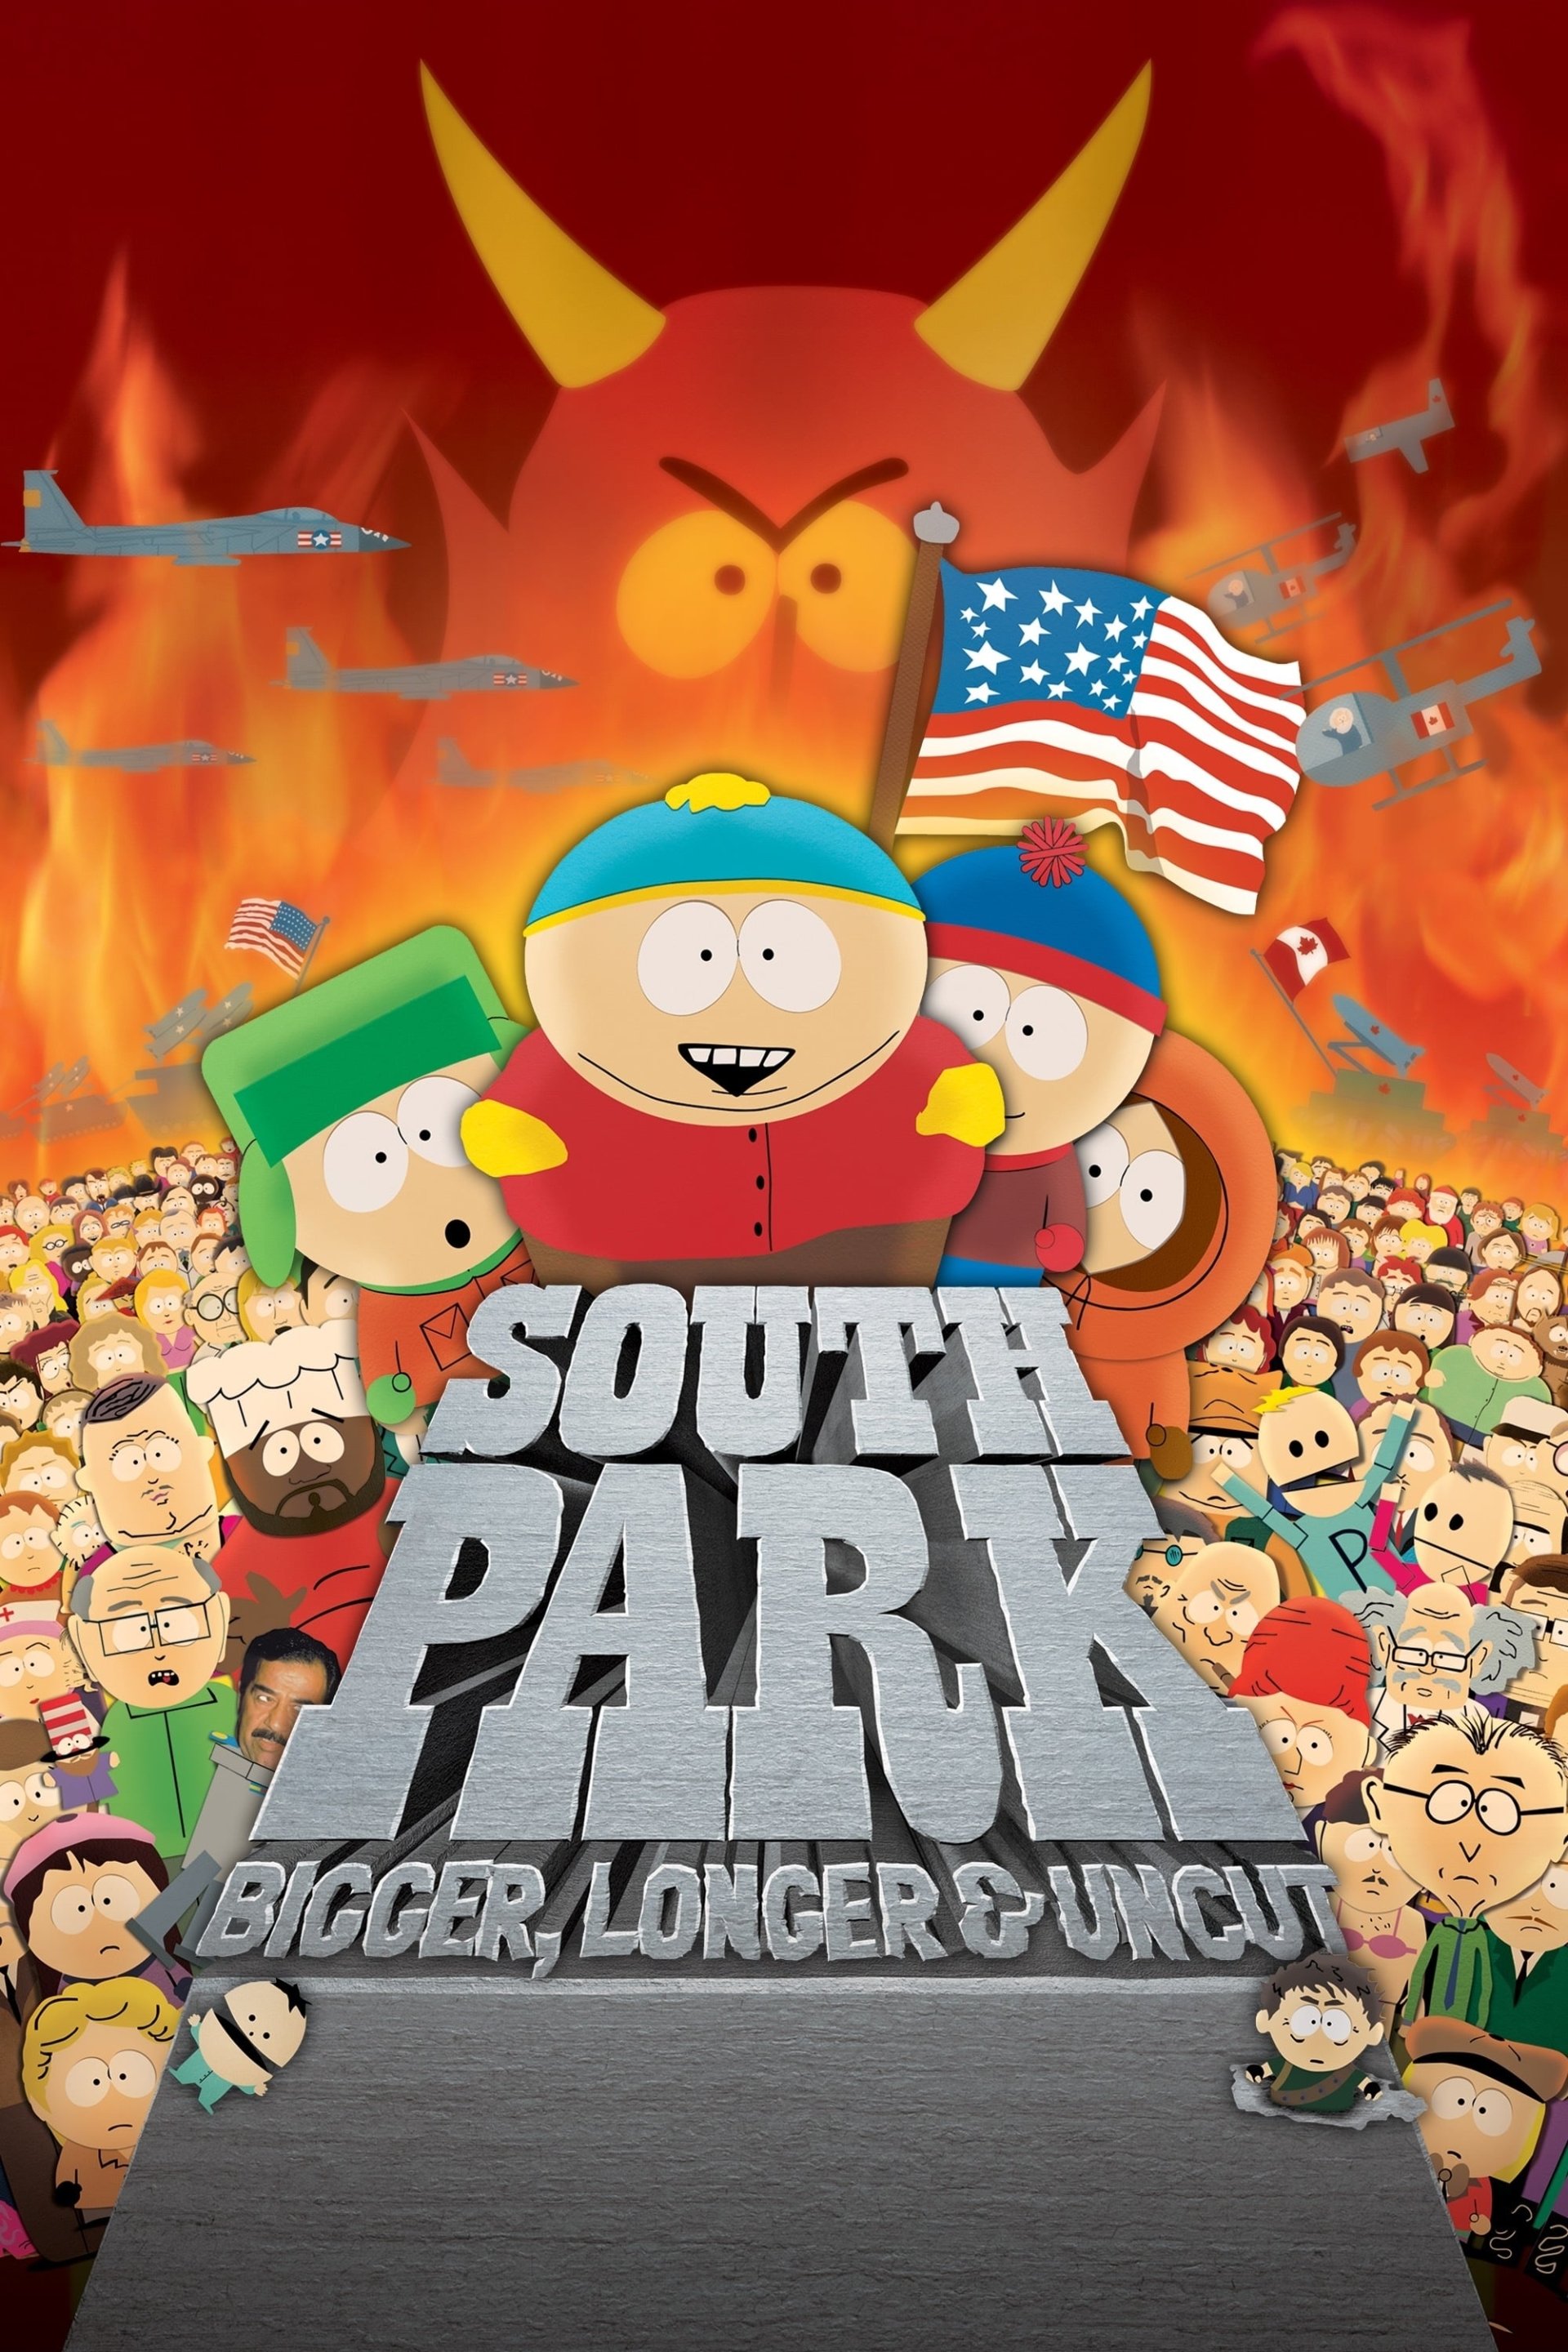 South Park Bigger, Longer & Uncut Movie Poster ID 399685 Image Abyss